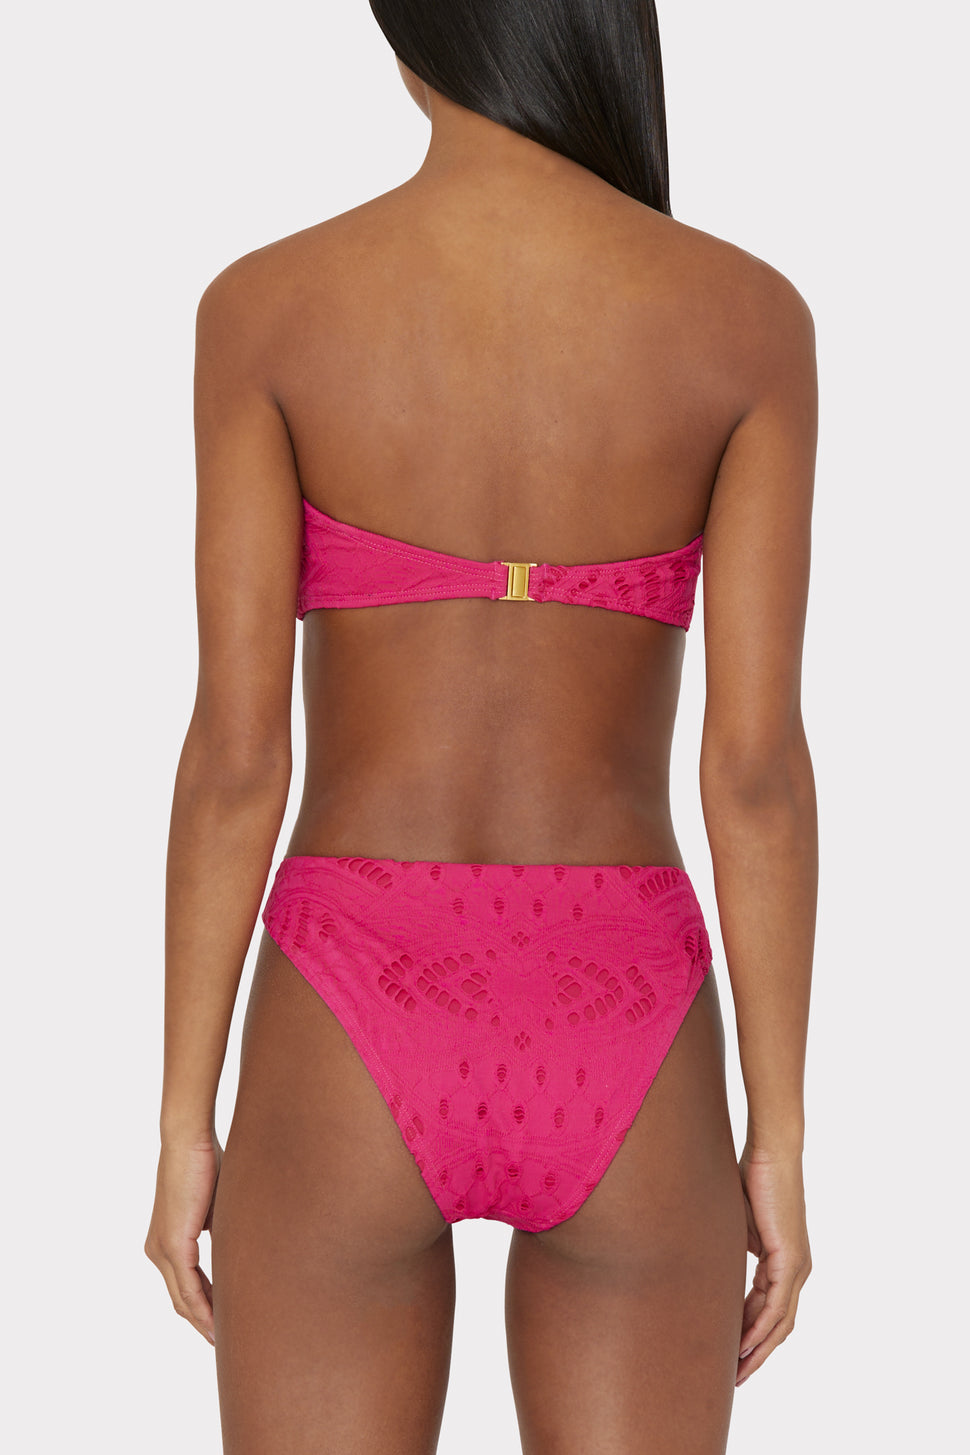 Lace Eyelet Bandeau Bikini Top In Pink - MILLY in Pink | MILLY